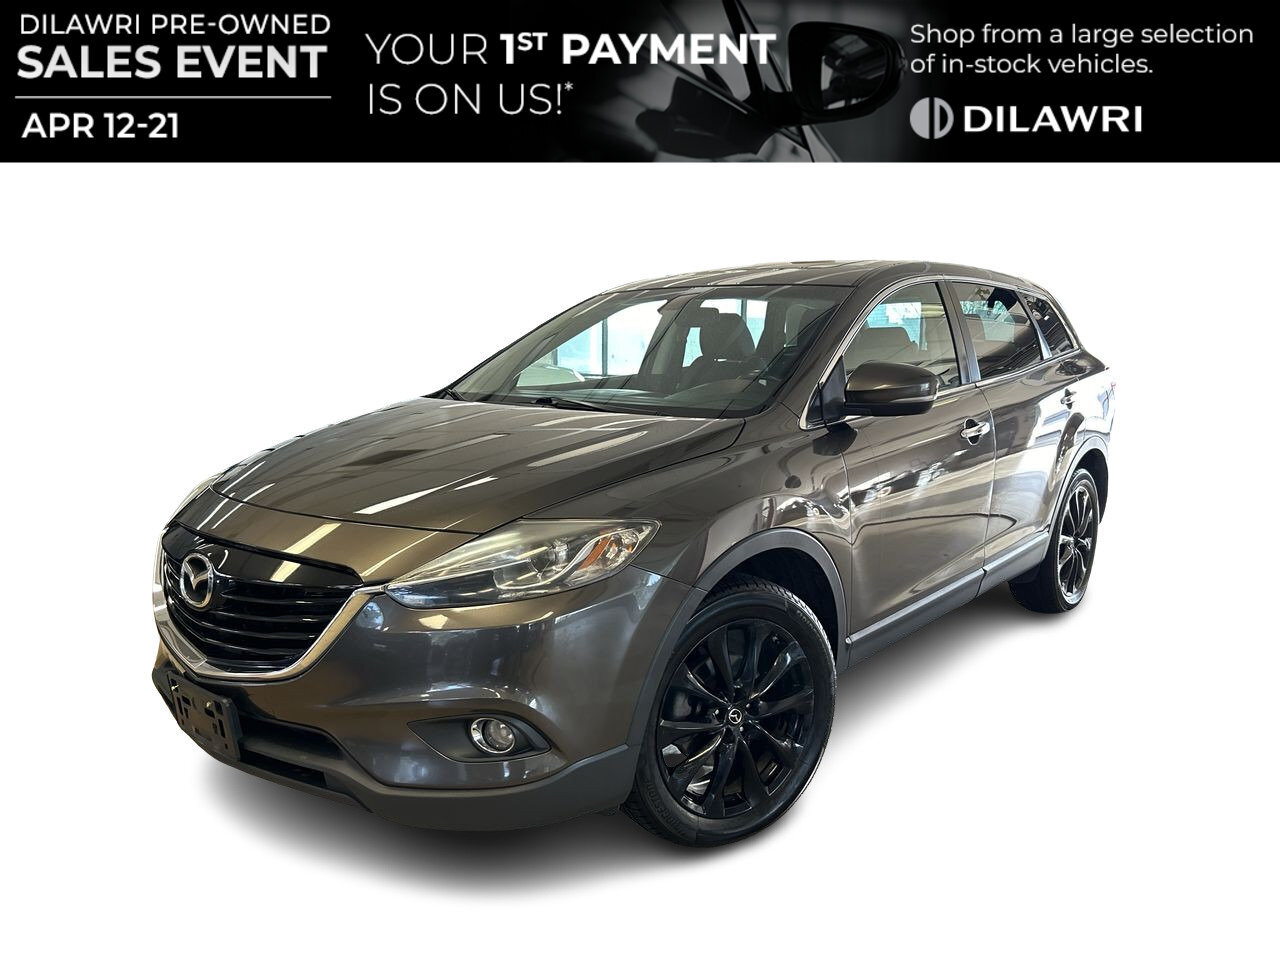 2015 Mazda CX-9 GT | Dilawri Pre-Owned Event ON Now! | / | Recent 